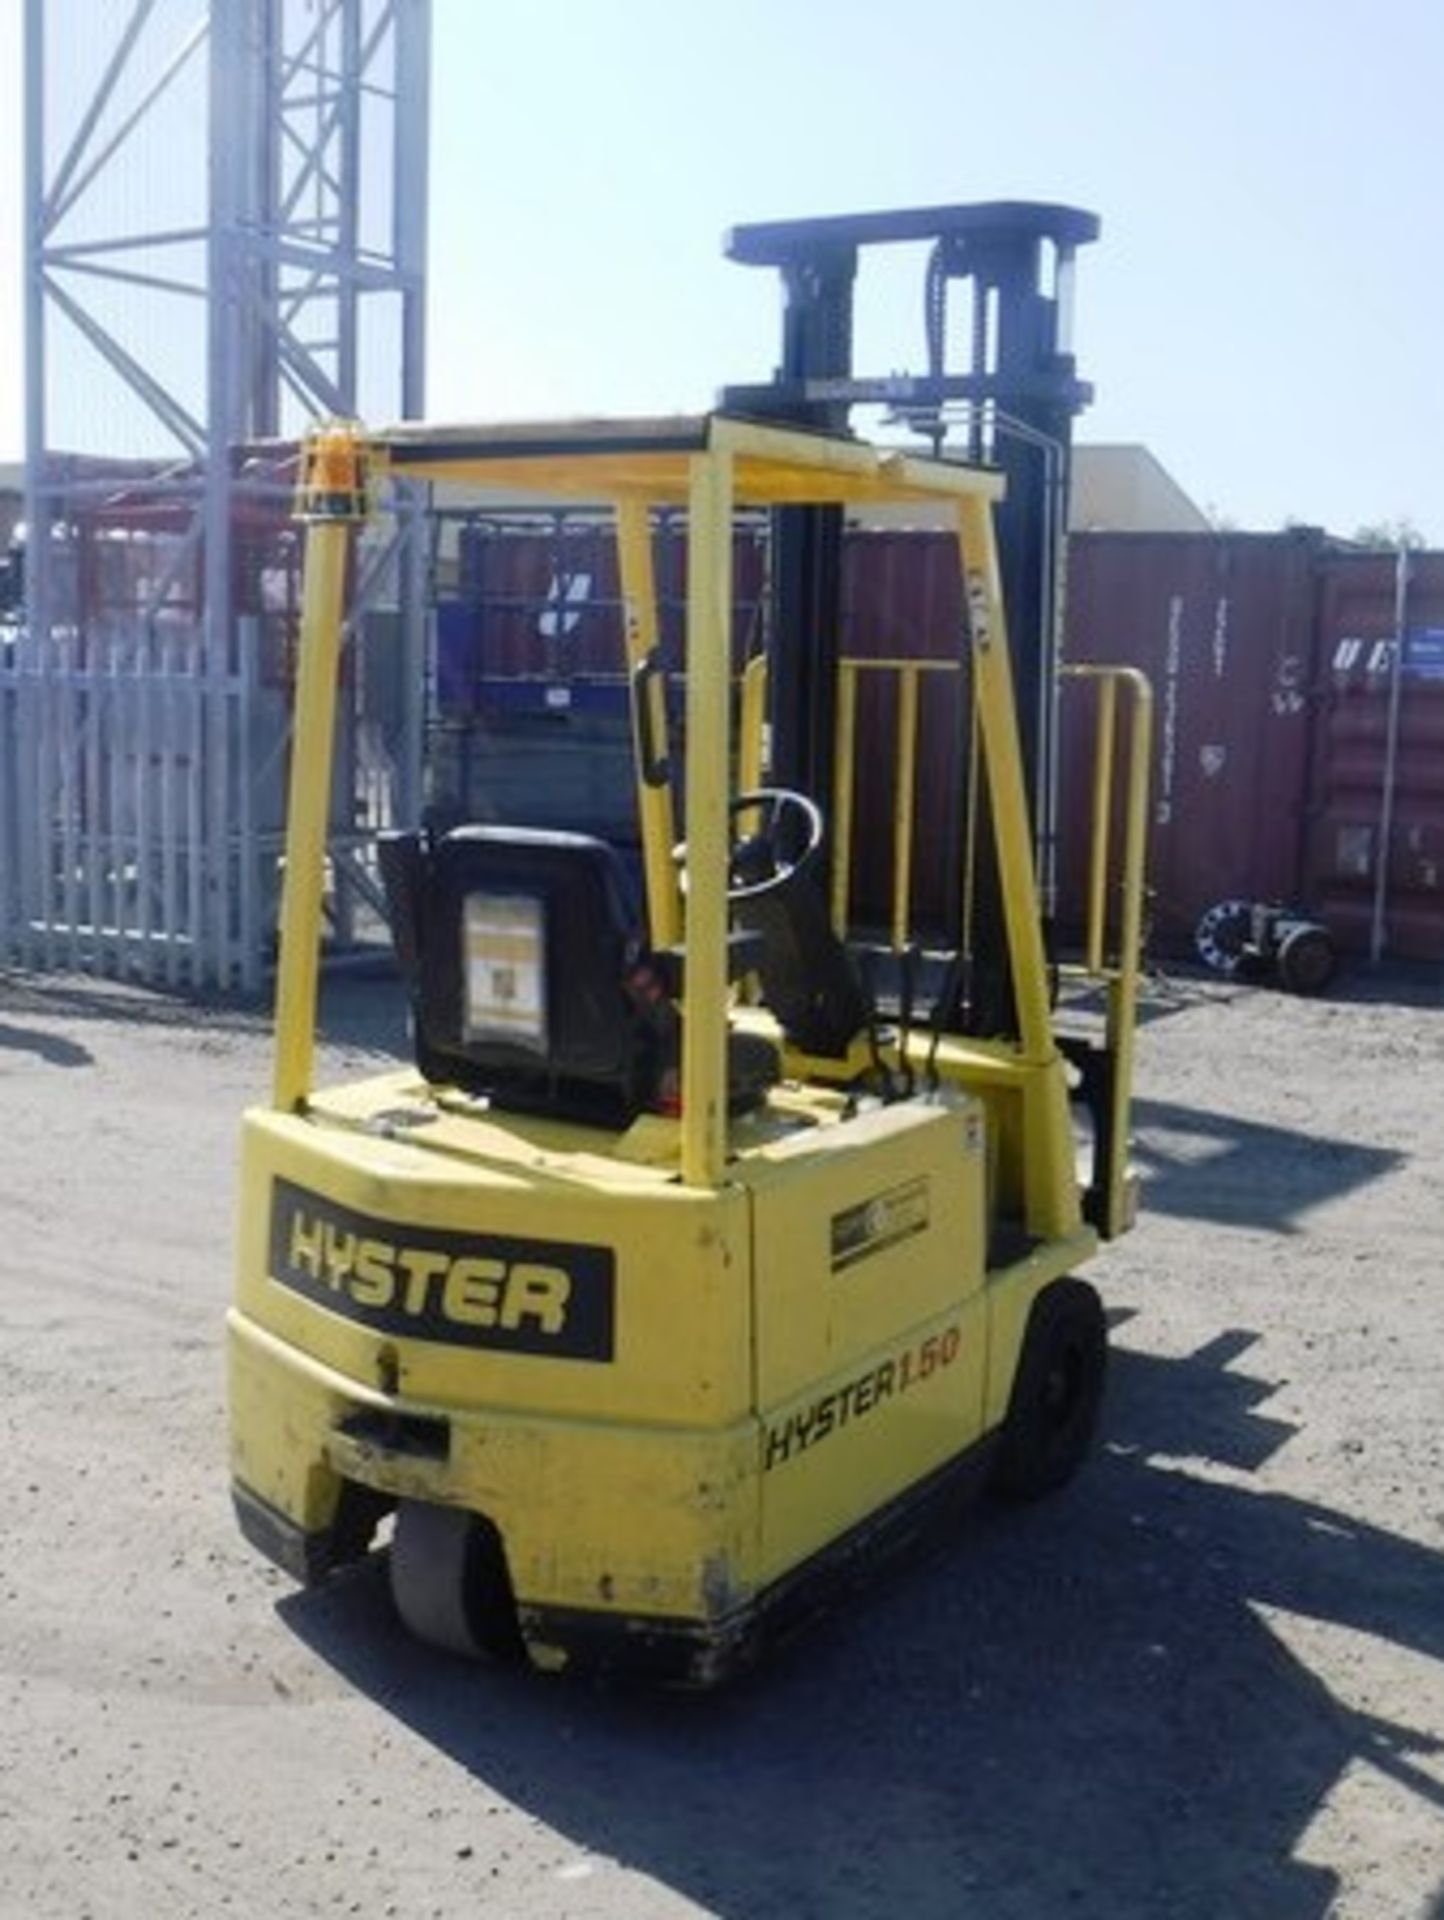 2011 HYSTER forklift A 1.50XL, s/n - C203B01762J, Max Reach - 3800mm, 402hrs (not verified) - Image 11 of 13